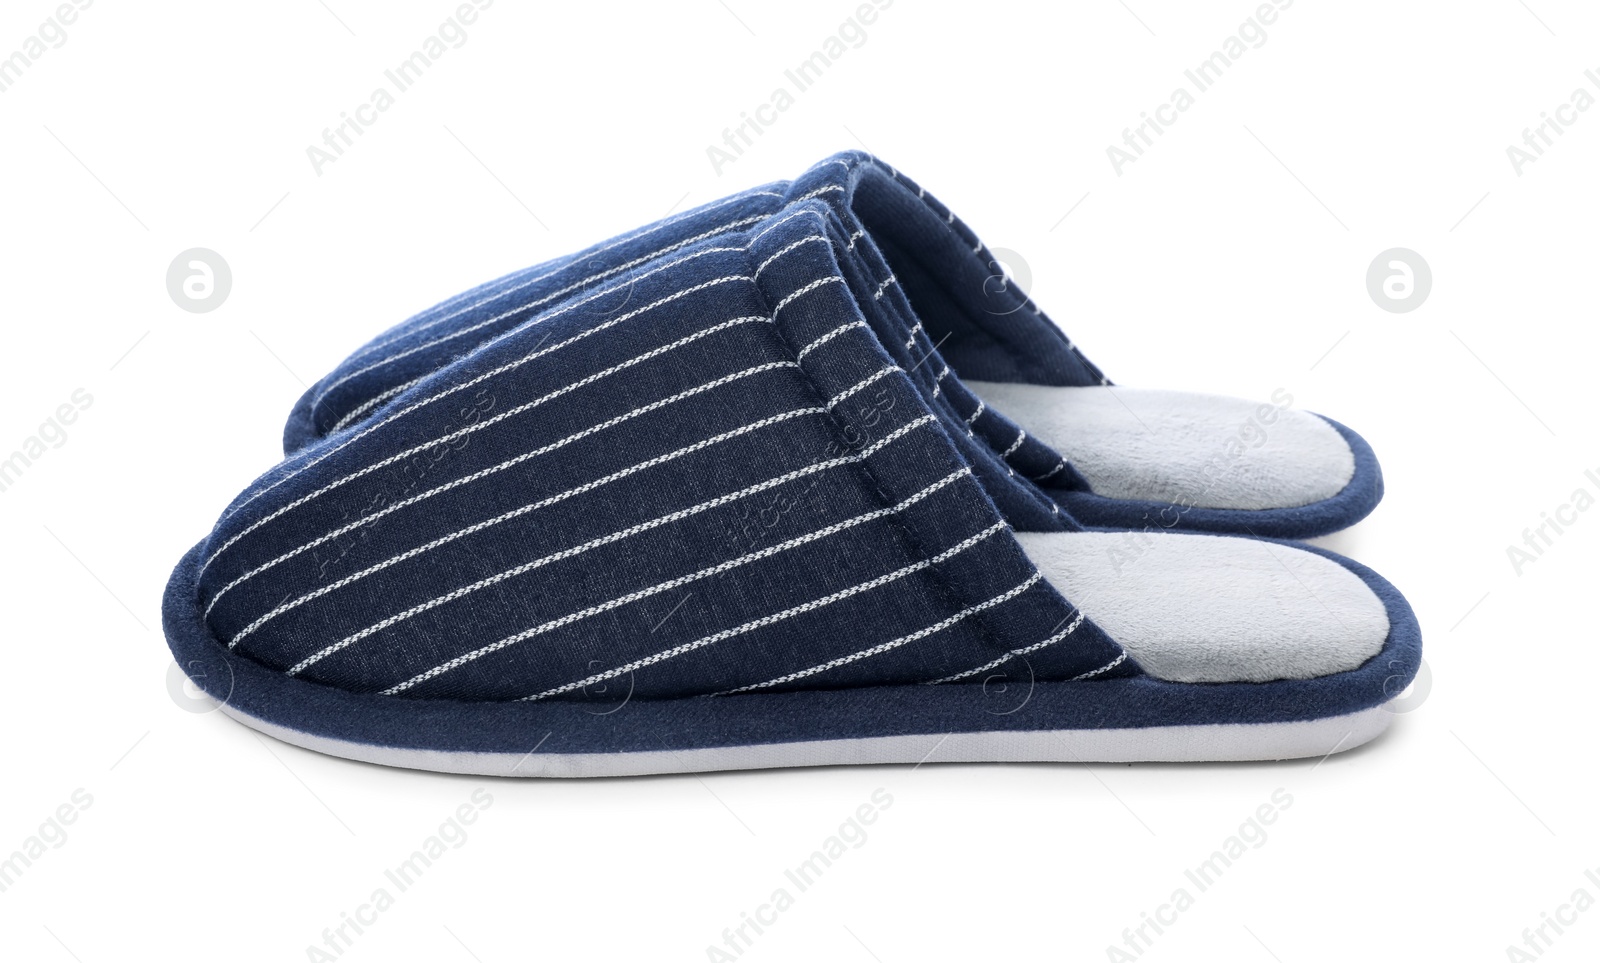 Photo of Pair of striped slippers isolated on white